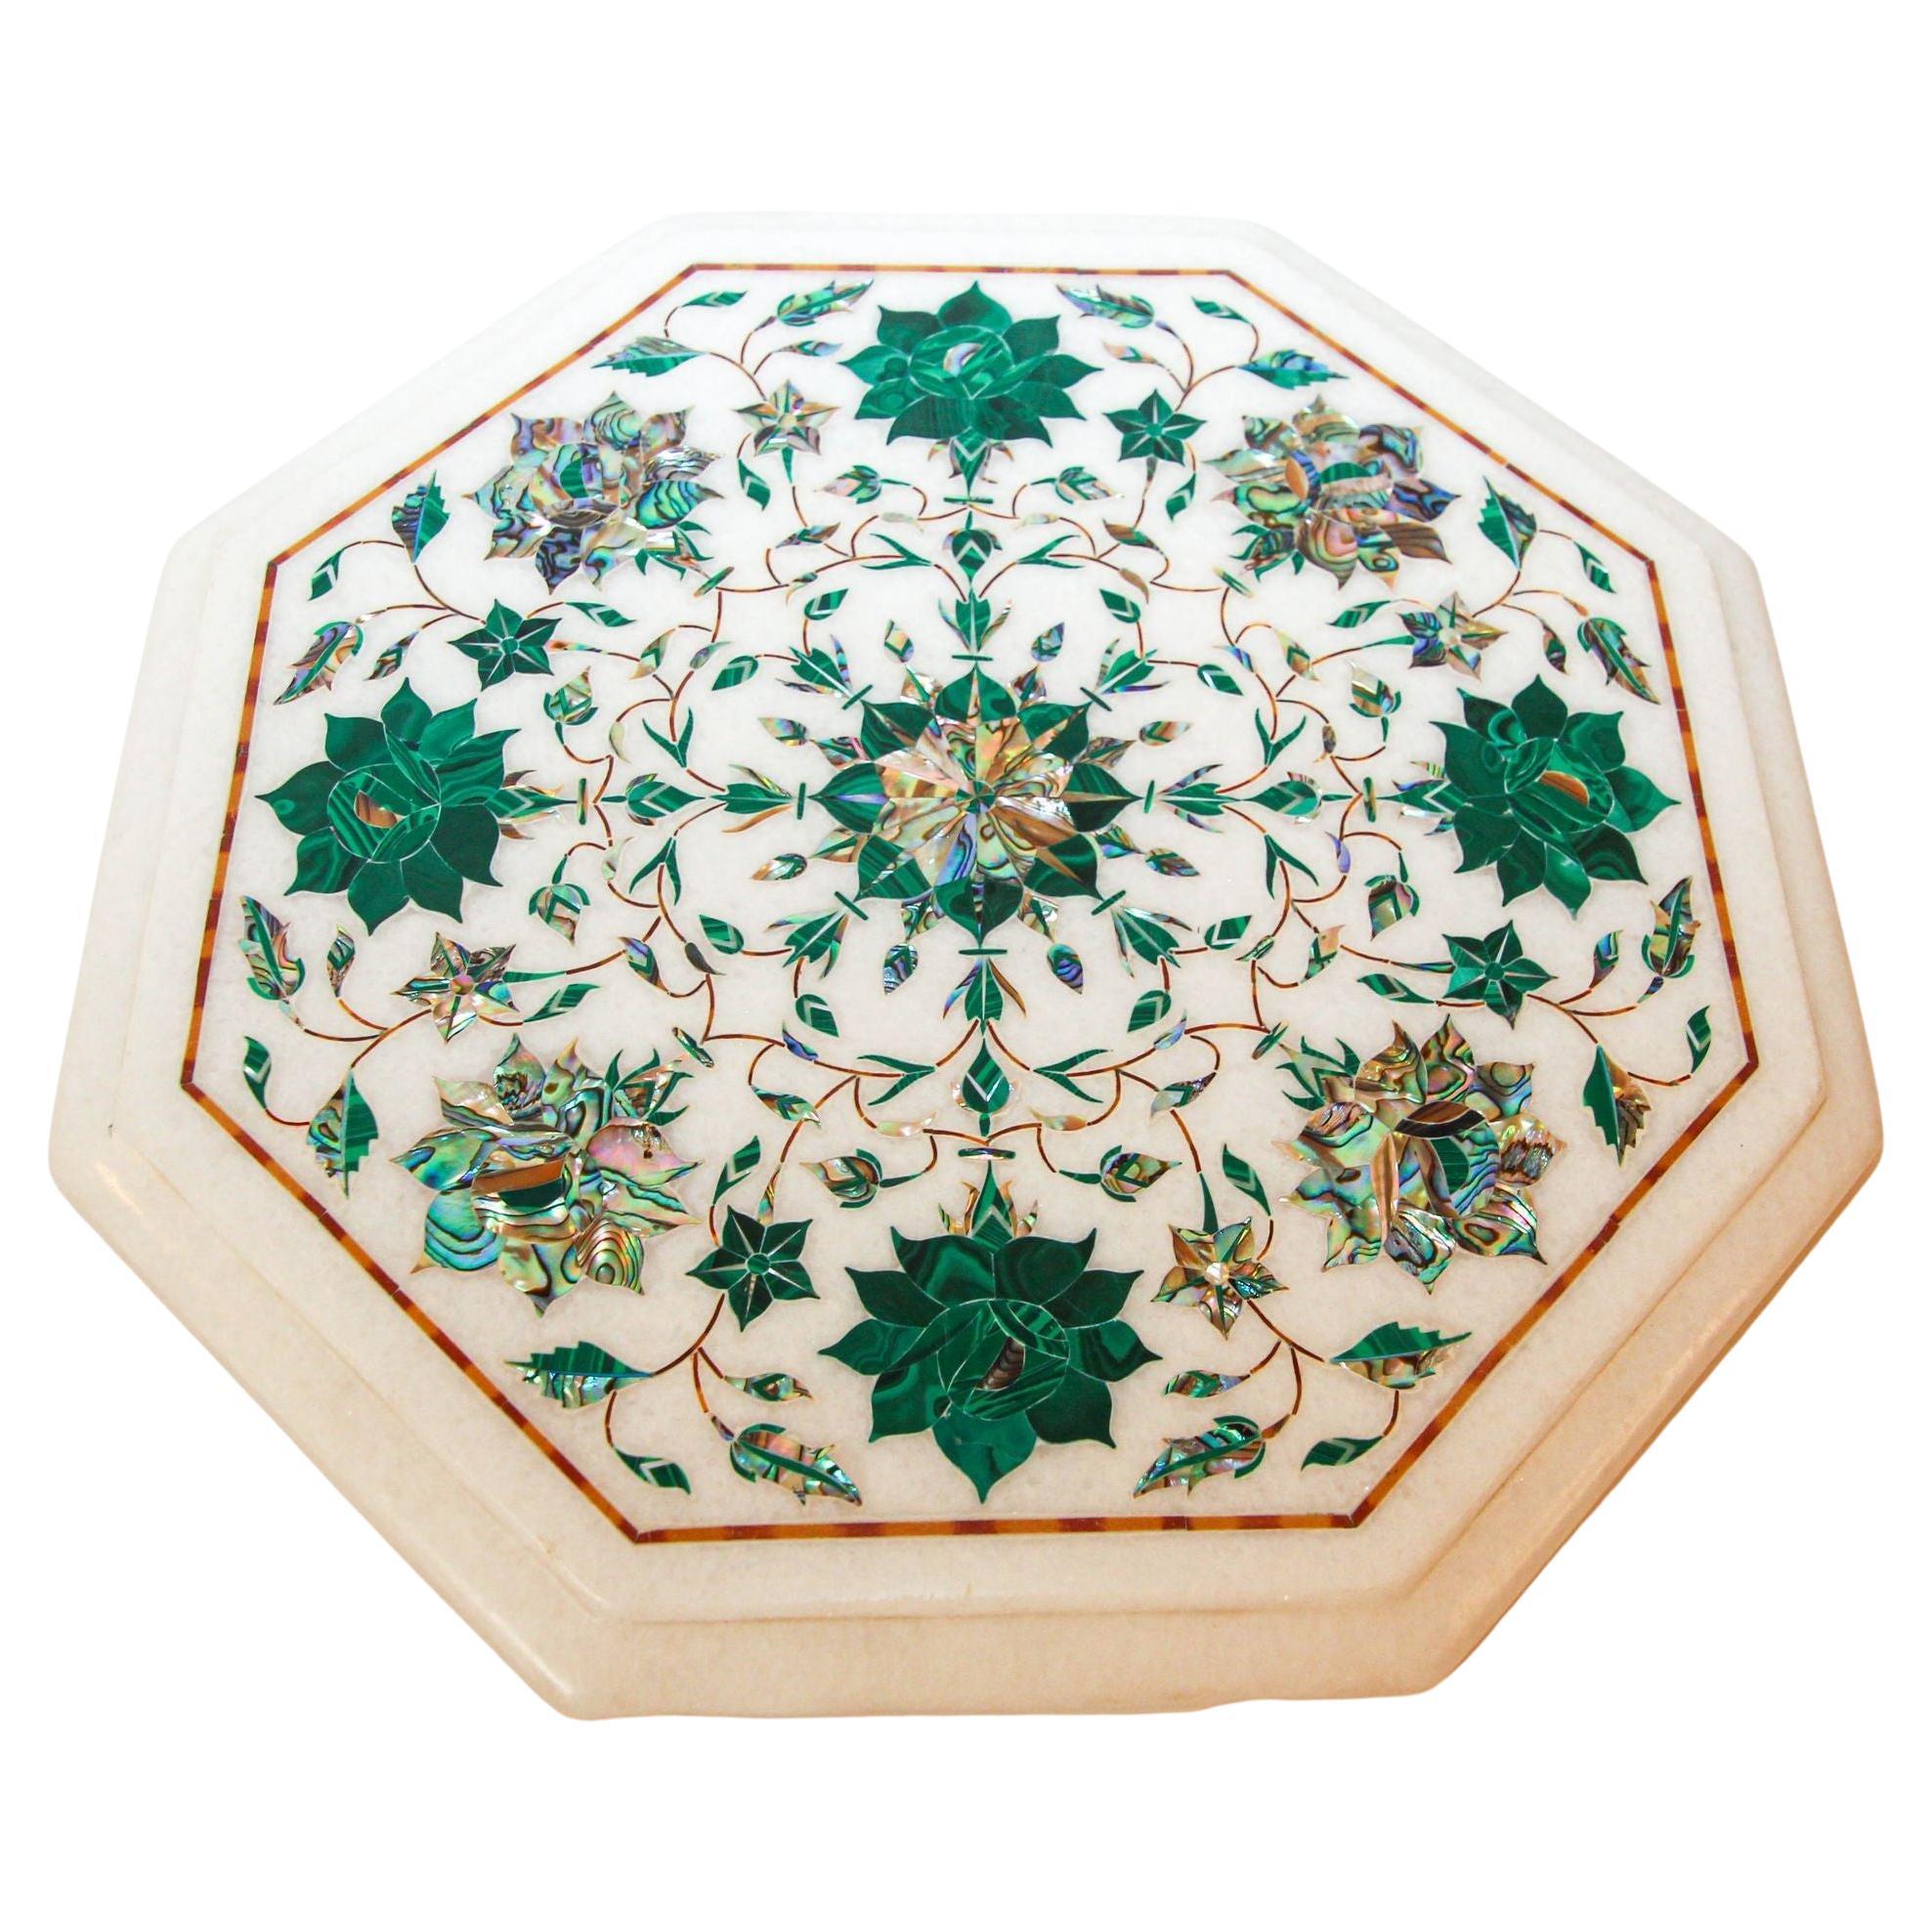 Pietra Dura White Mosaic Octagonal Inlaid Marble Top Handcrafted Agra India 1980